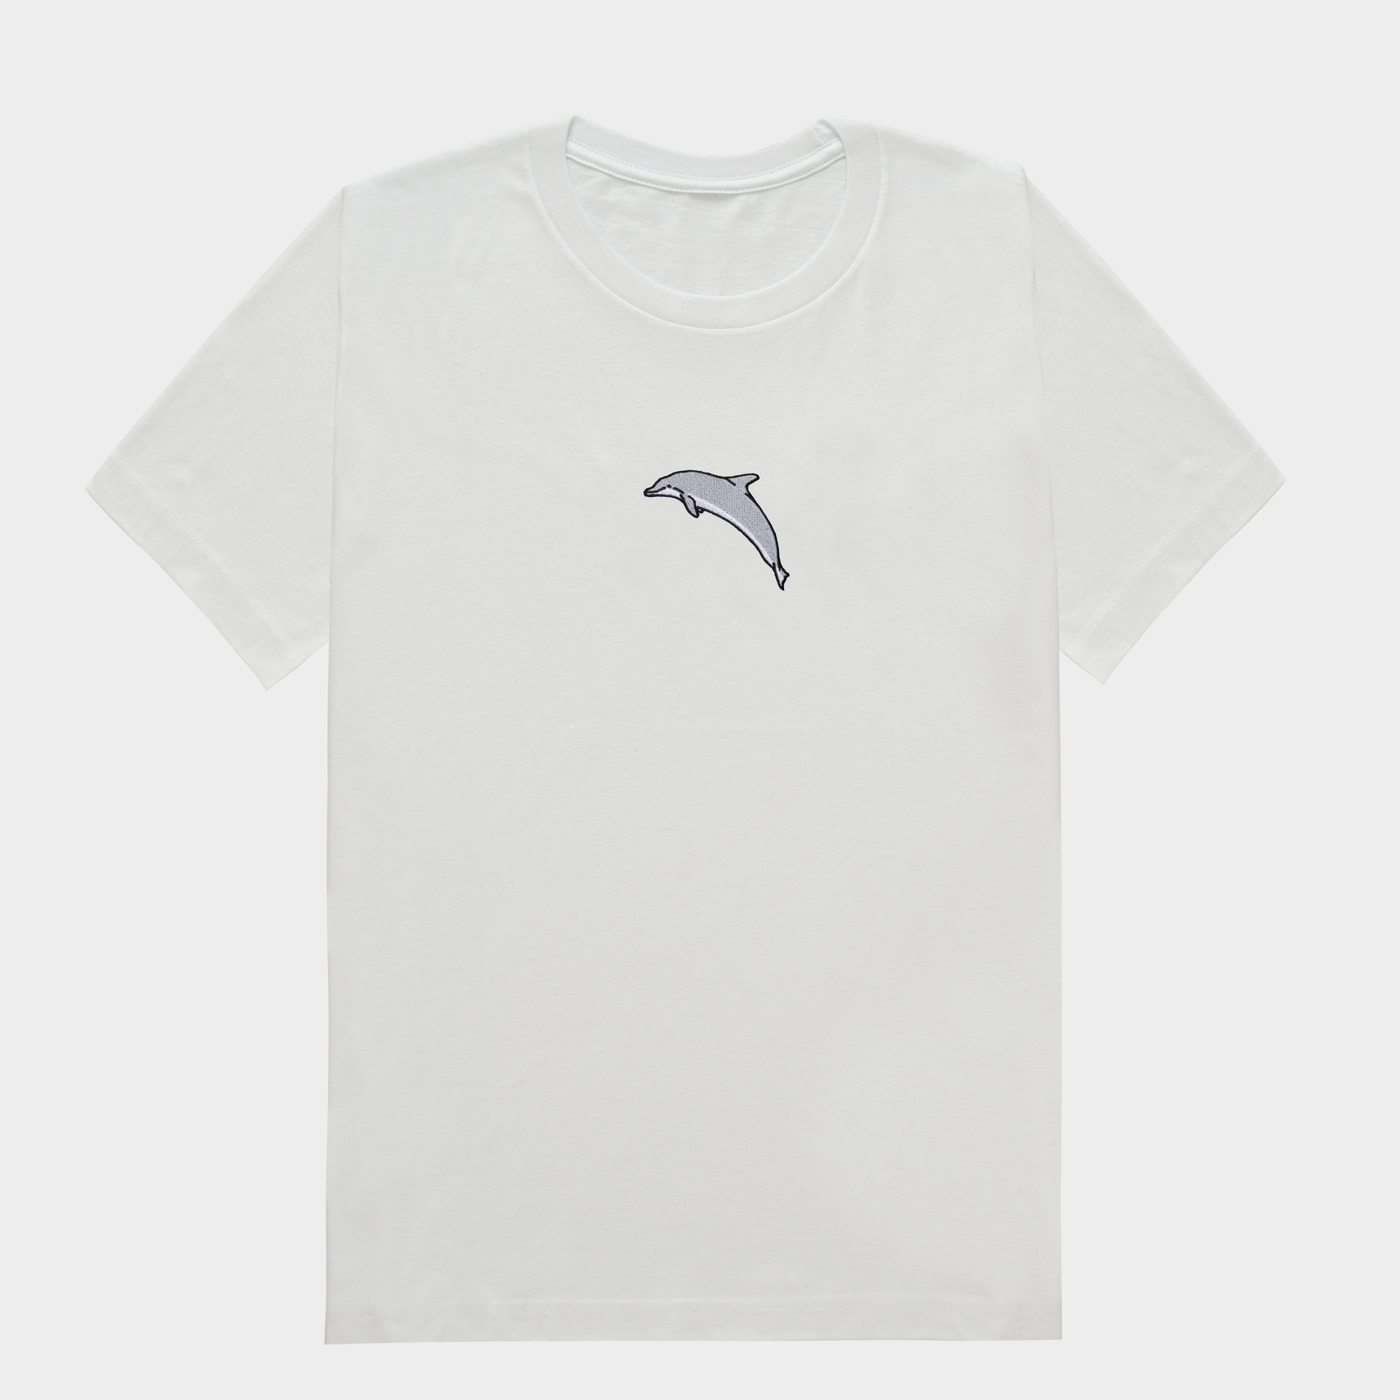 Bobby's Planet Men's Embroidered Dolphin T-Shirt from Seven Seas Fish Animals Collection in White Color#color_white